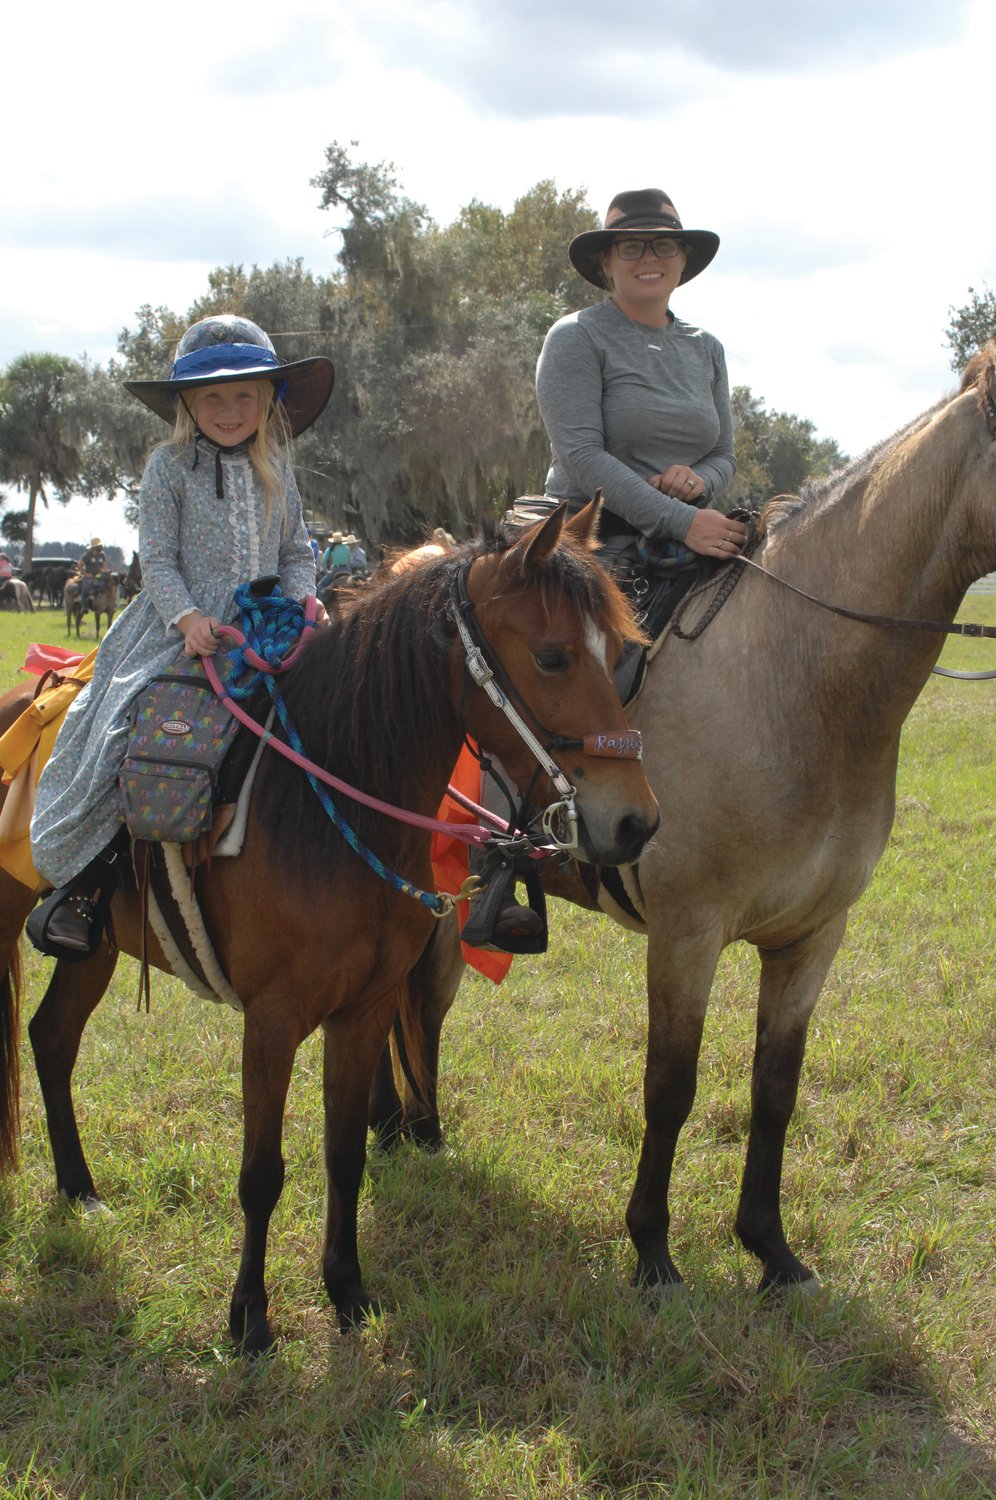 For some, the annual ride is a family affair and a chance for children to learn Florida history.